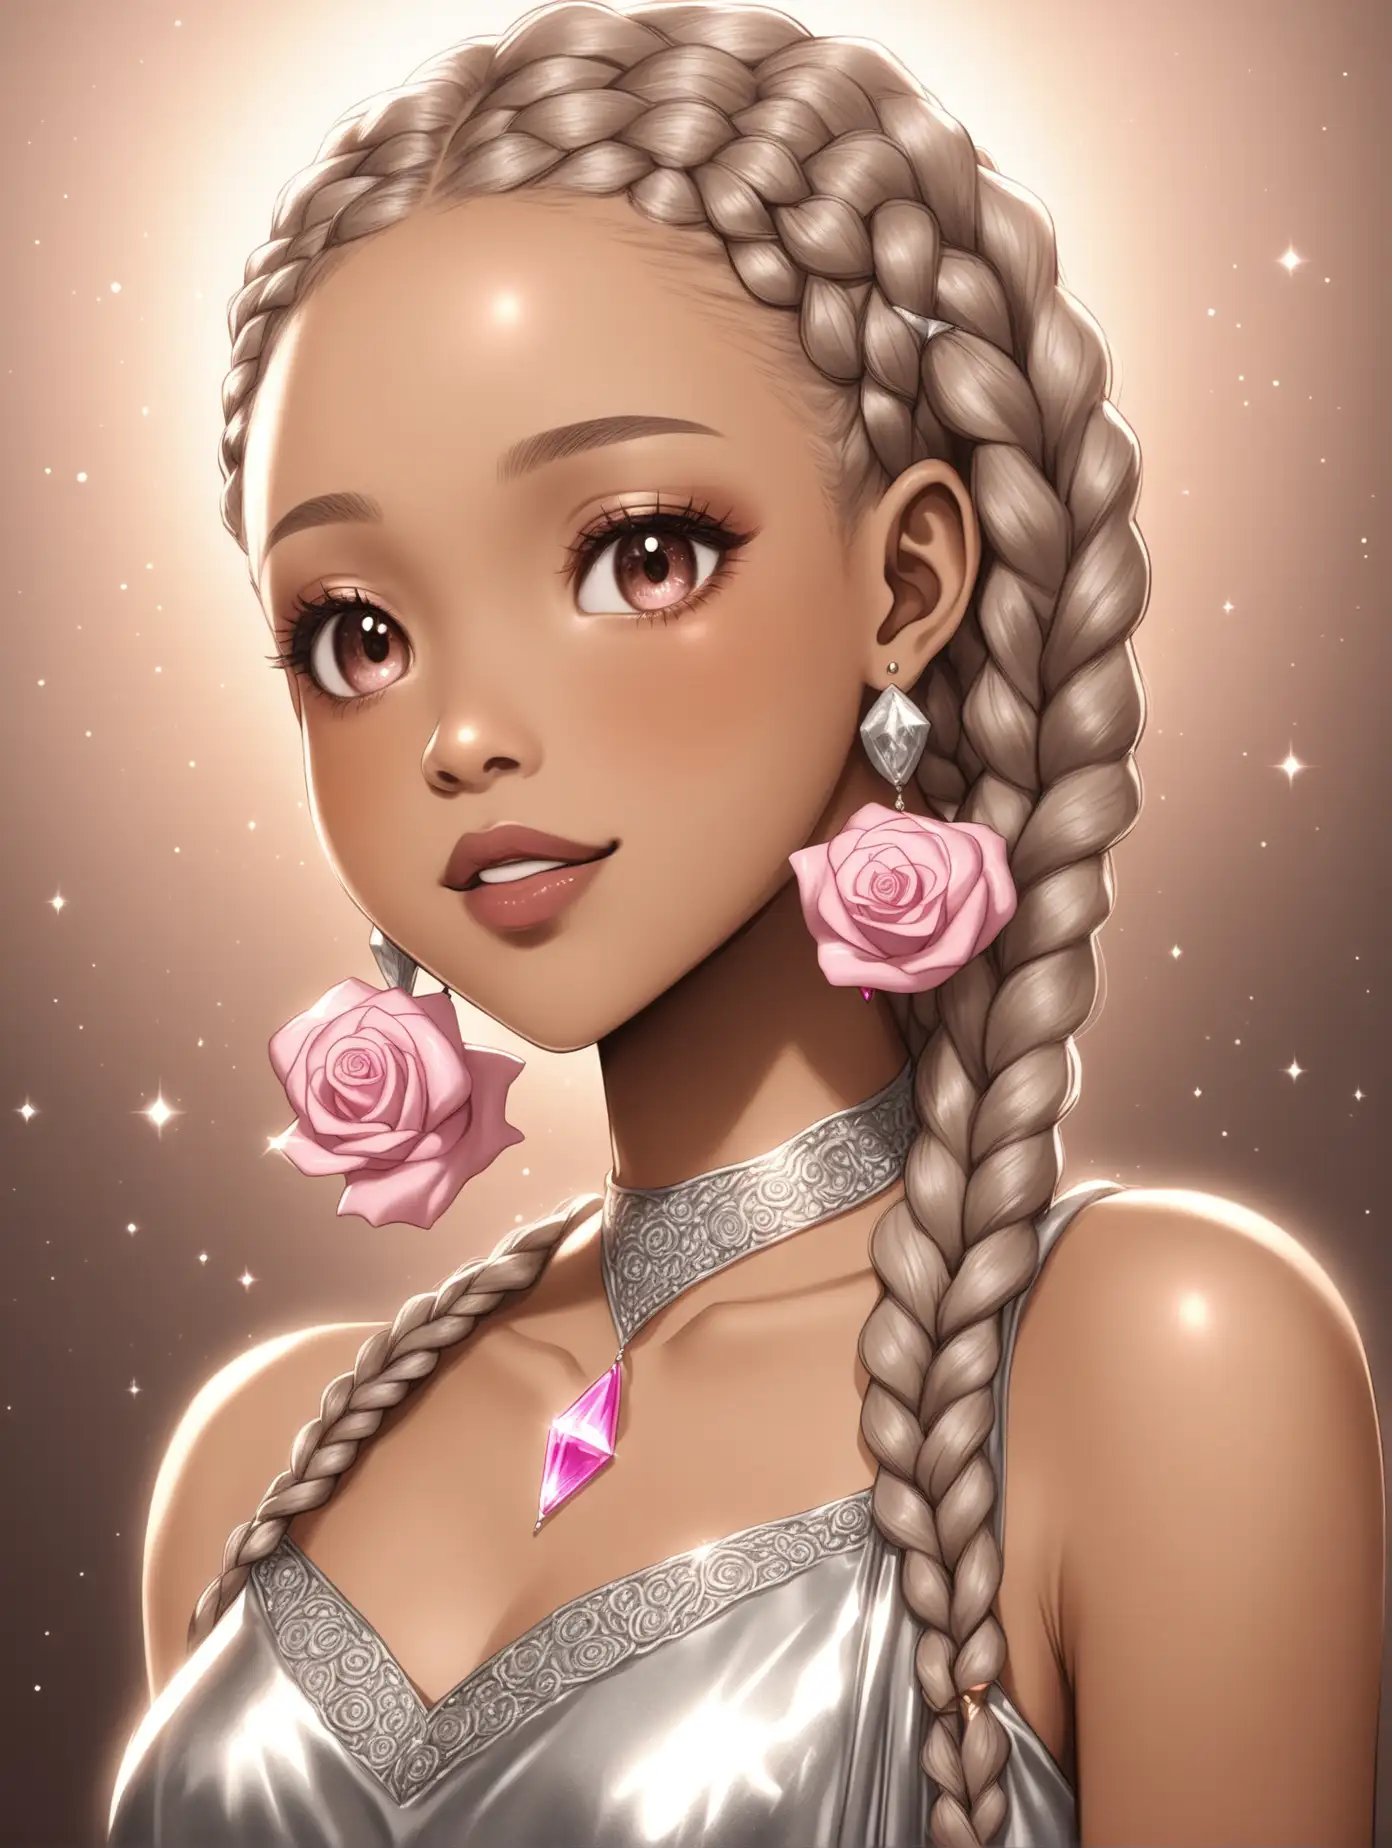 Elegant BrownSkinned Woman in Silver Dress with Box Braids and Rose Earrings